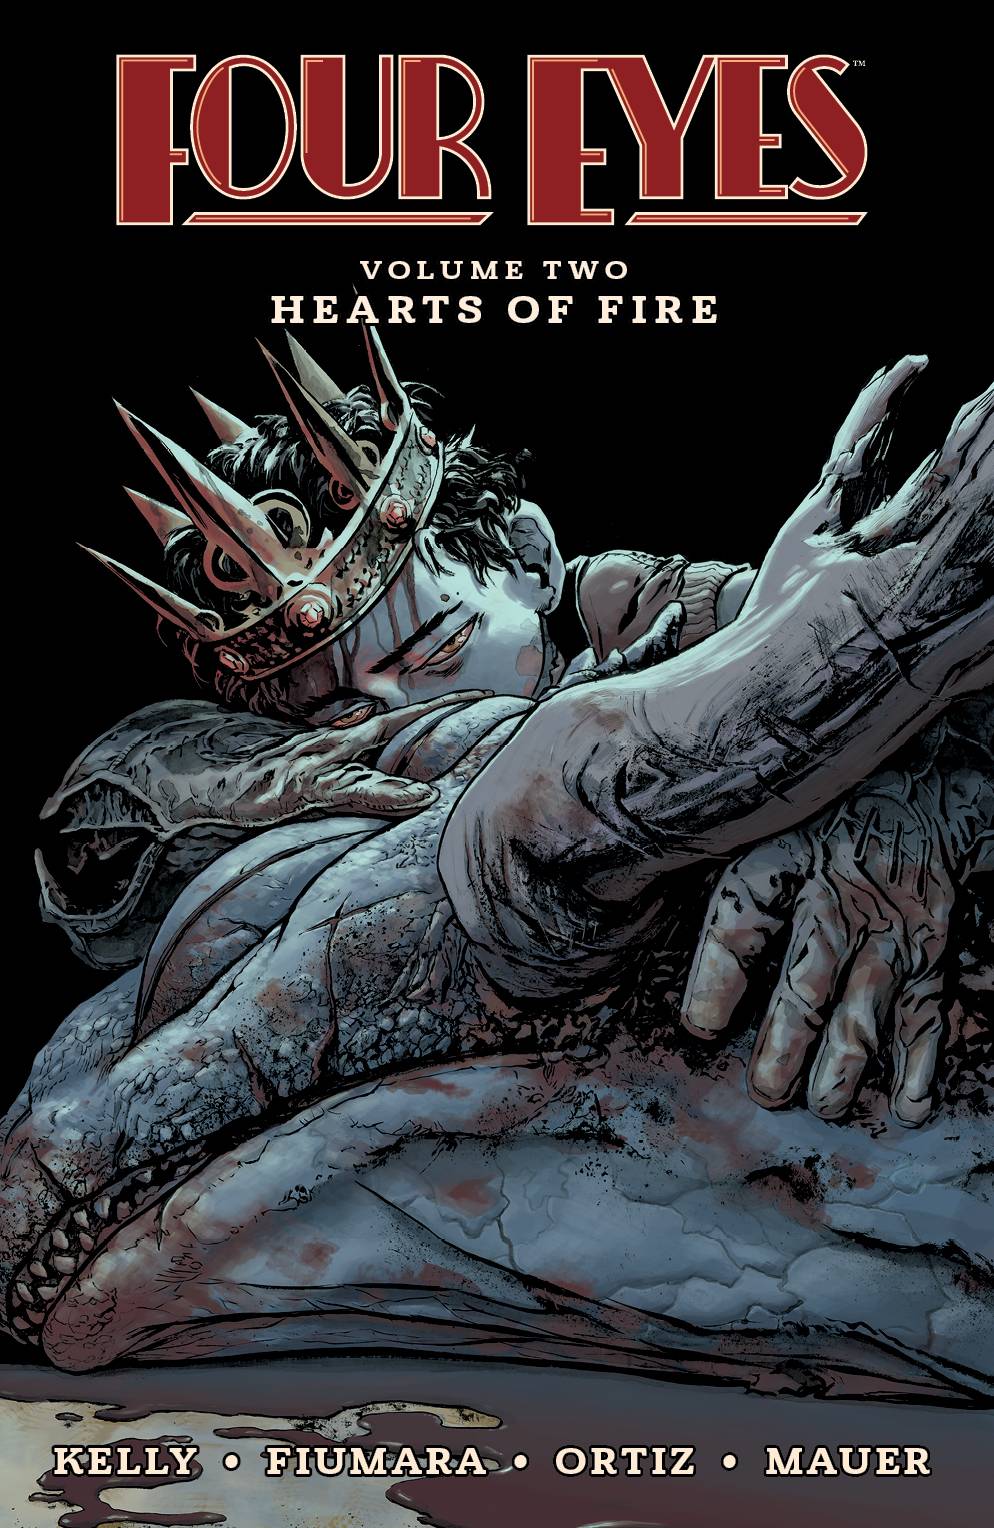 Four Eyes Graphic Novel Volume 2 Hearts of Fire